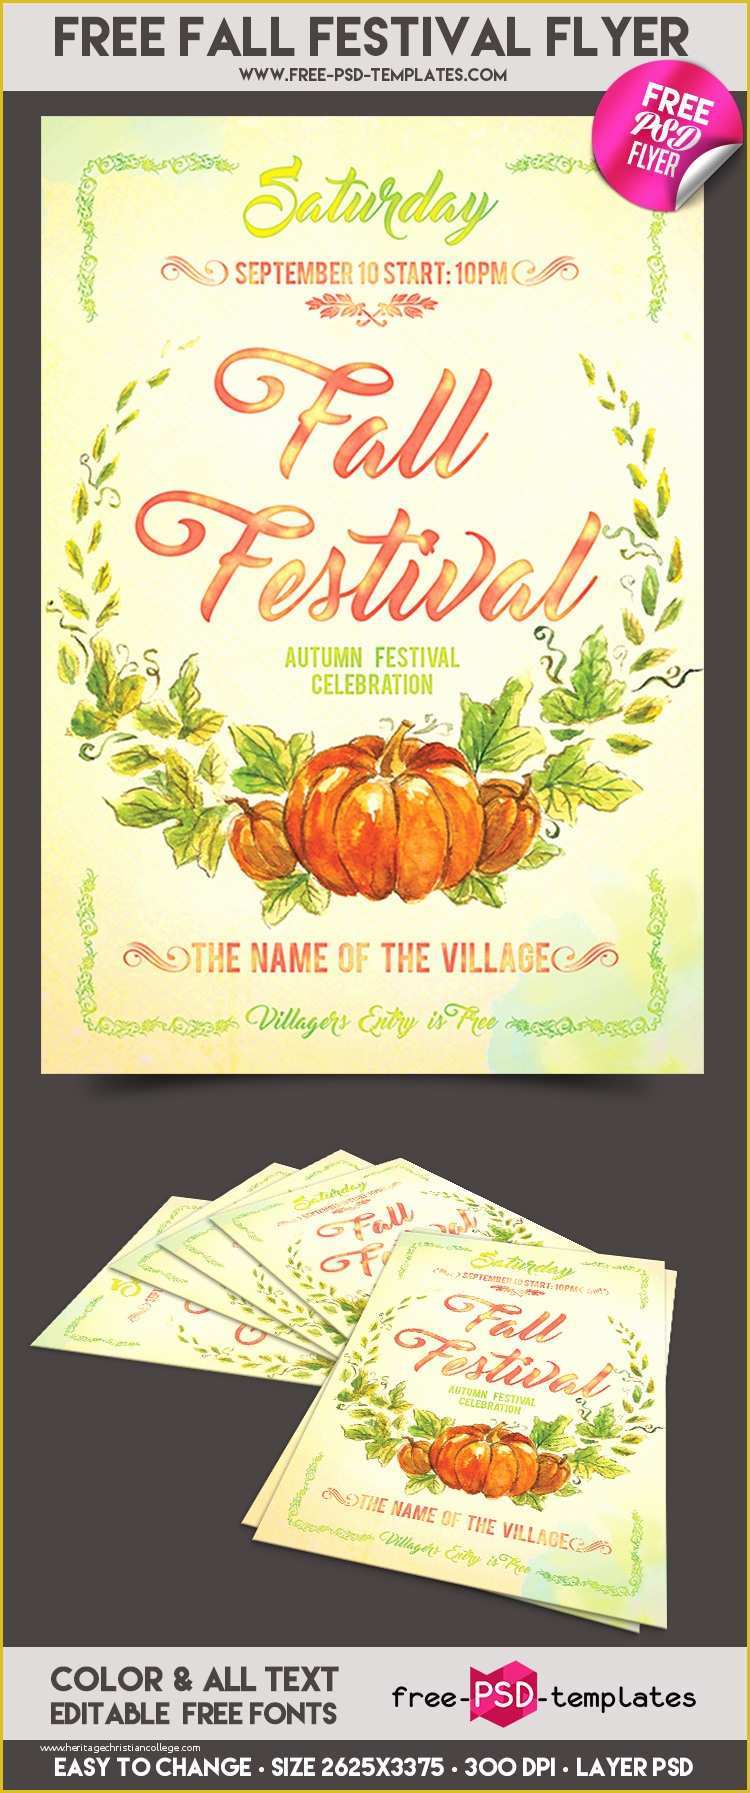 Free Printable Fall Flyer Templates Of Free Fall Festival Flyer In Psd